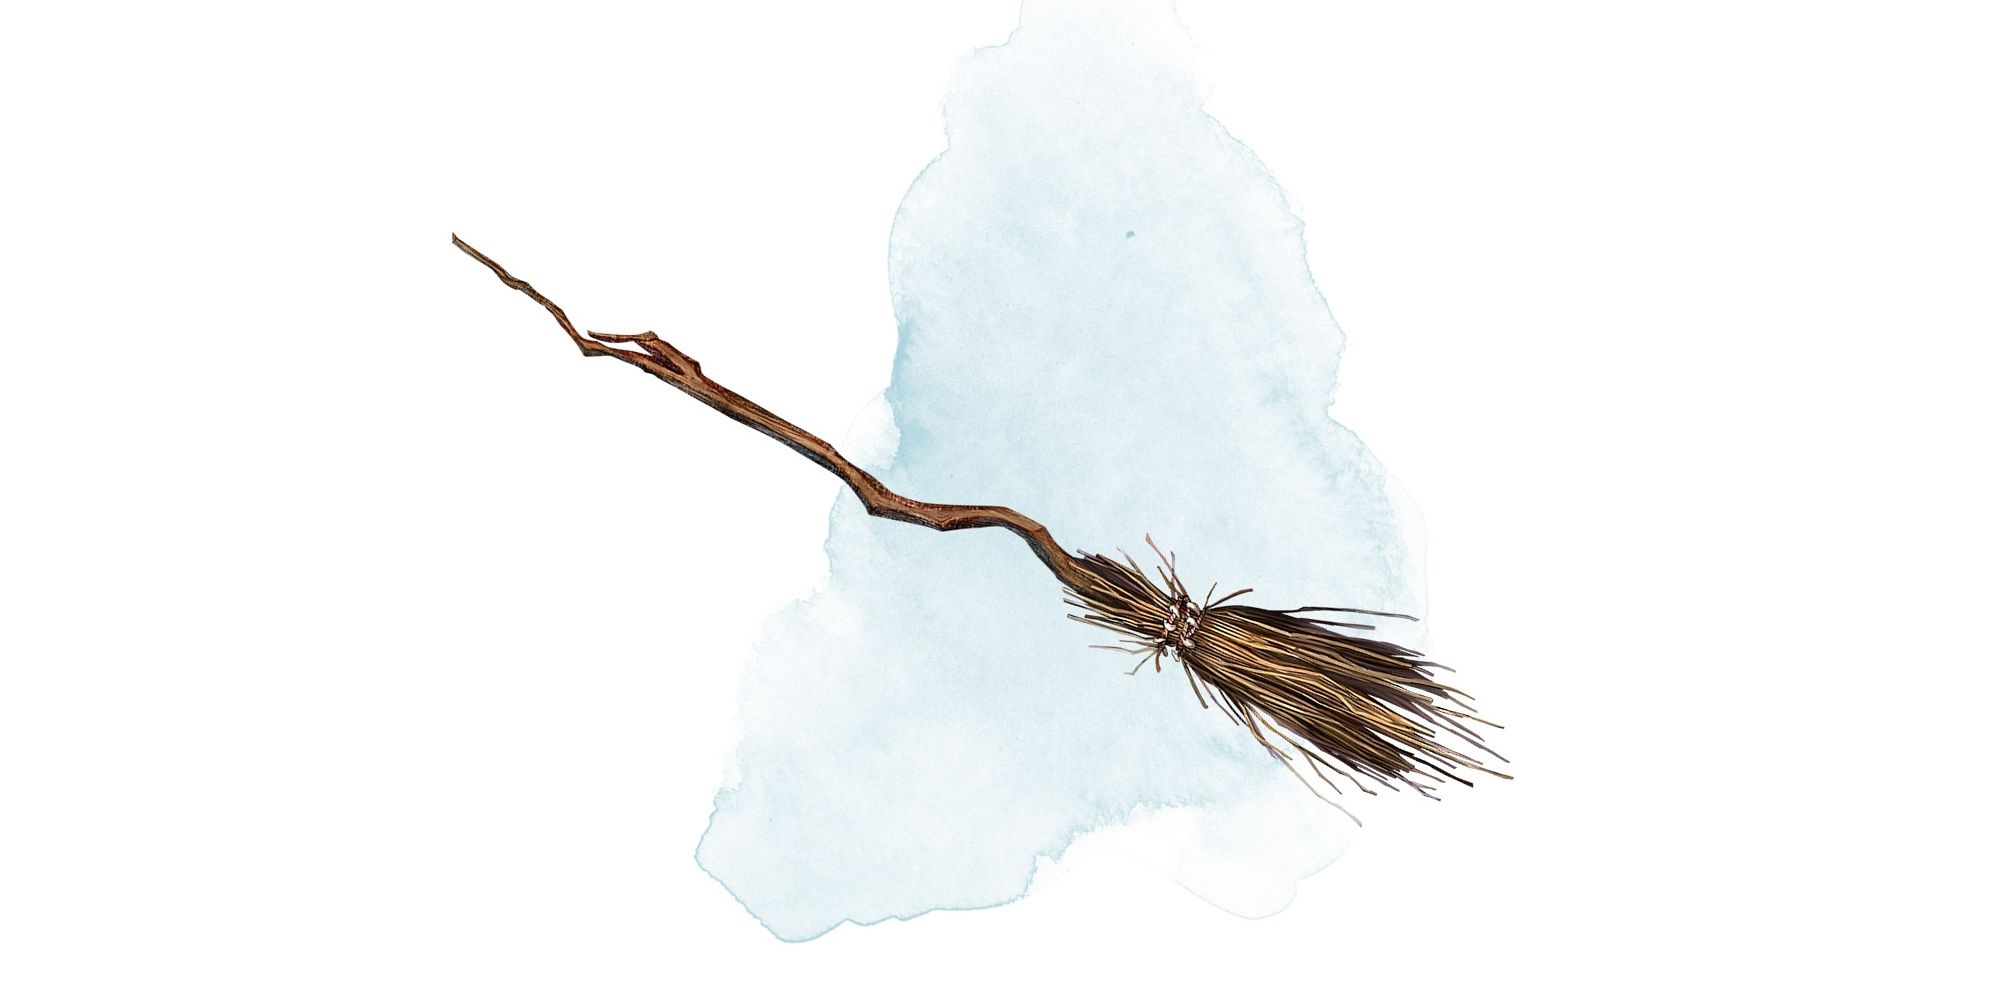 DnD Broom of Flying, a wooden broom with an uneven branch handle.